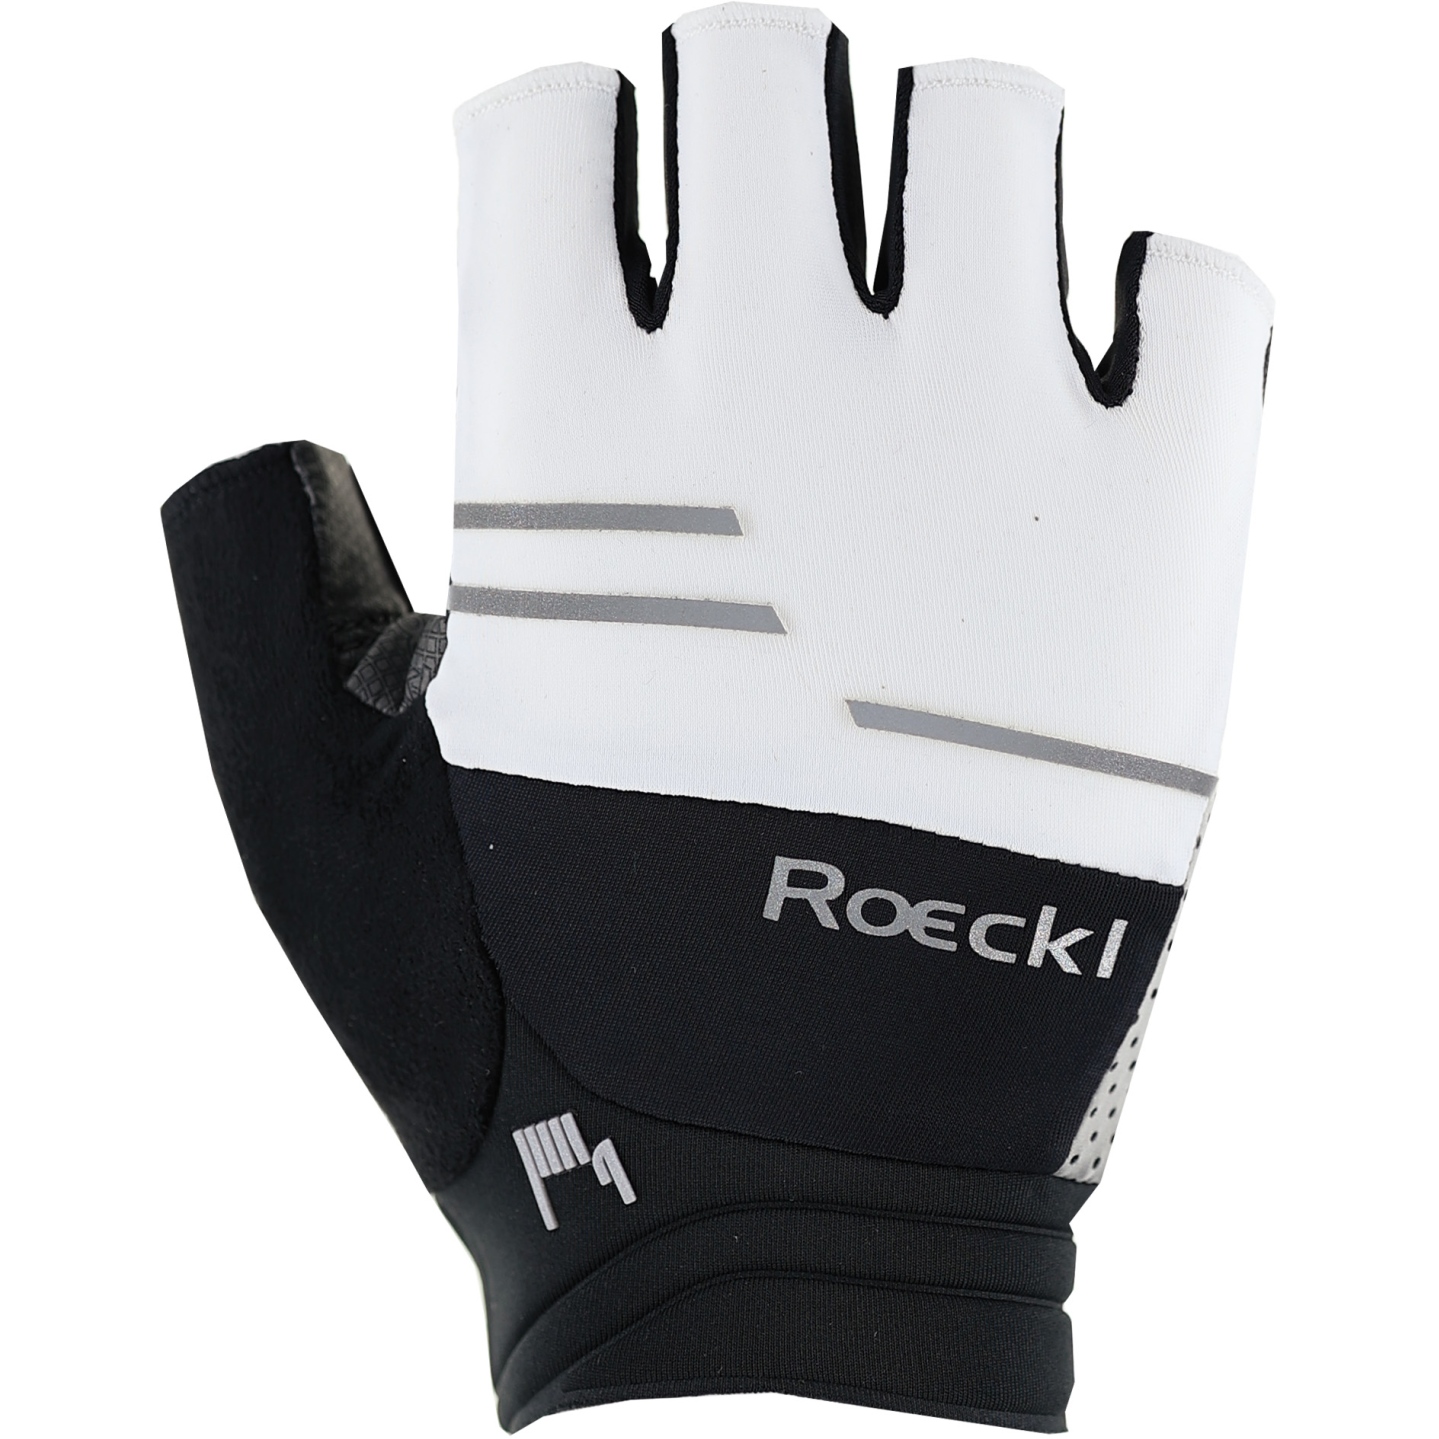 Picture of Roeckl Sports Iguna Cycling Gloves - white/black 1009